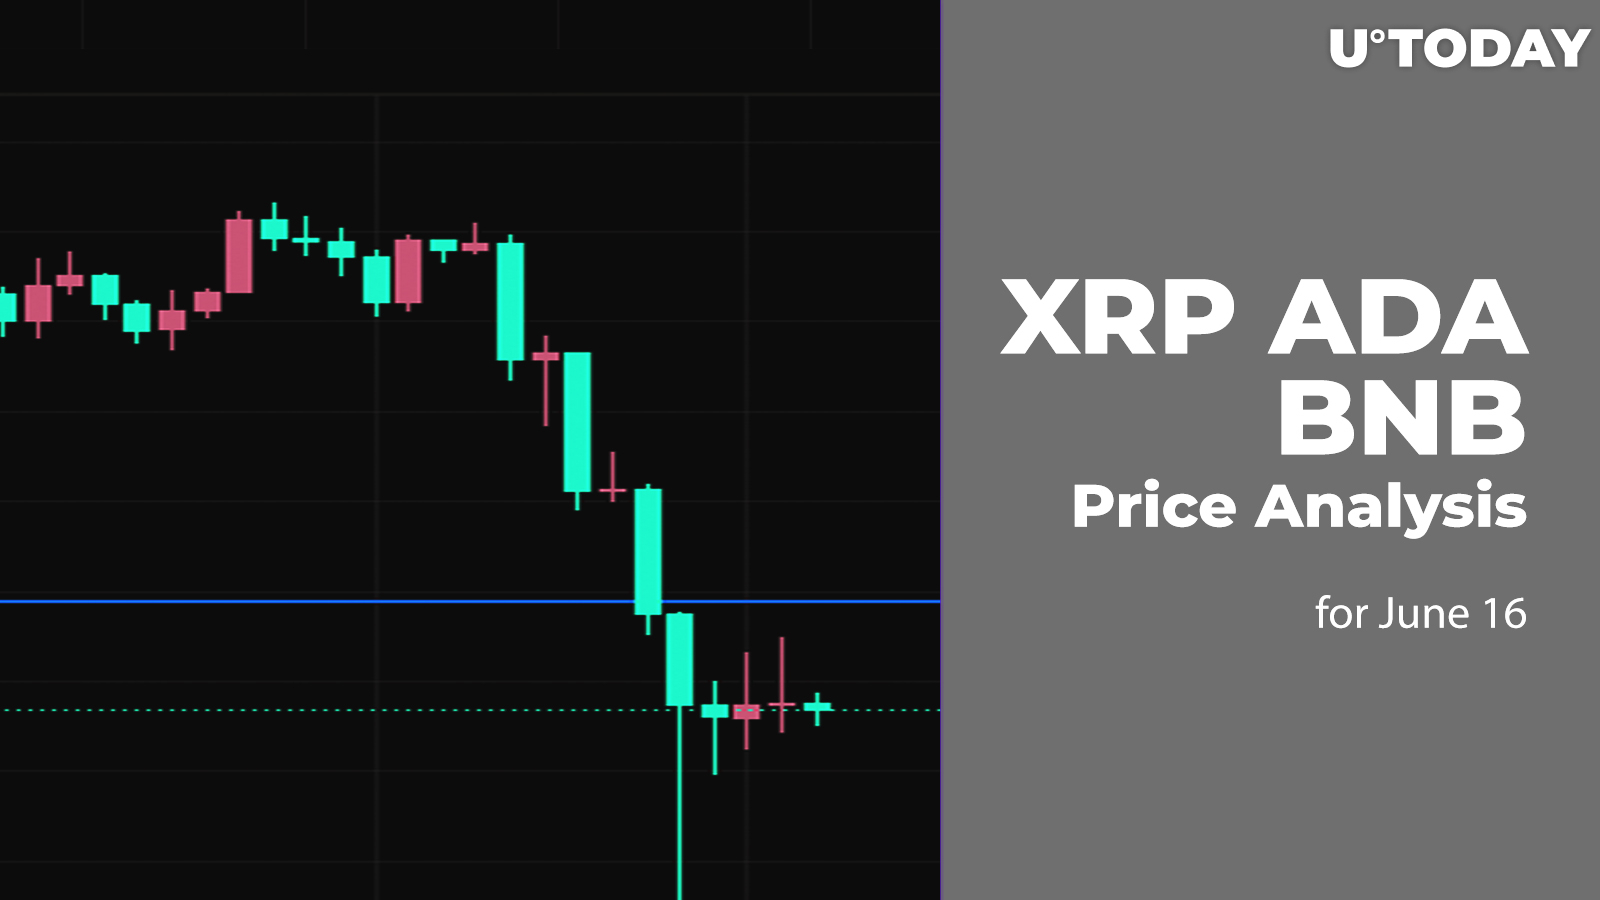 XRP, ADA and BNB Price Analysis for June 16